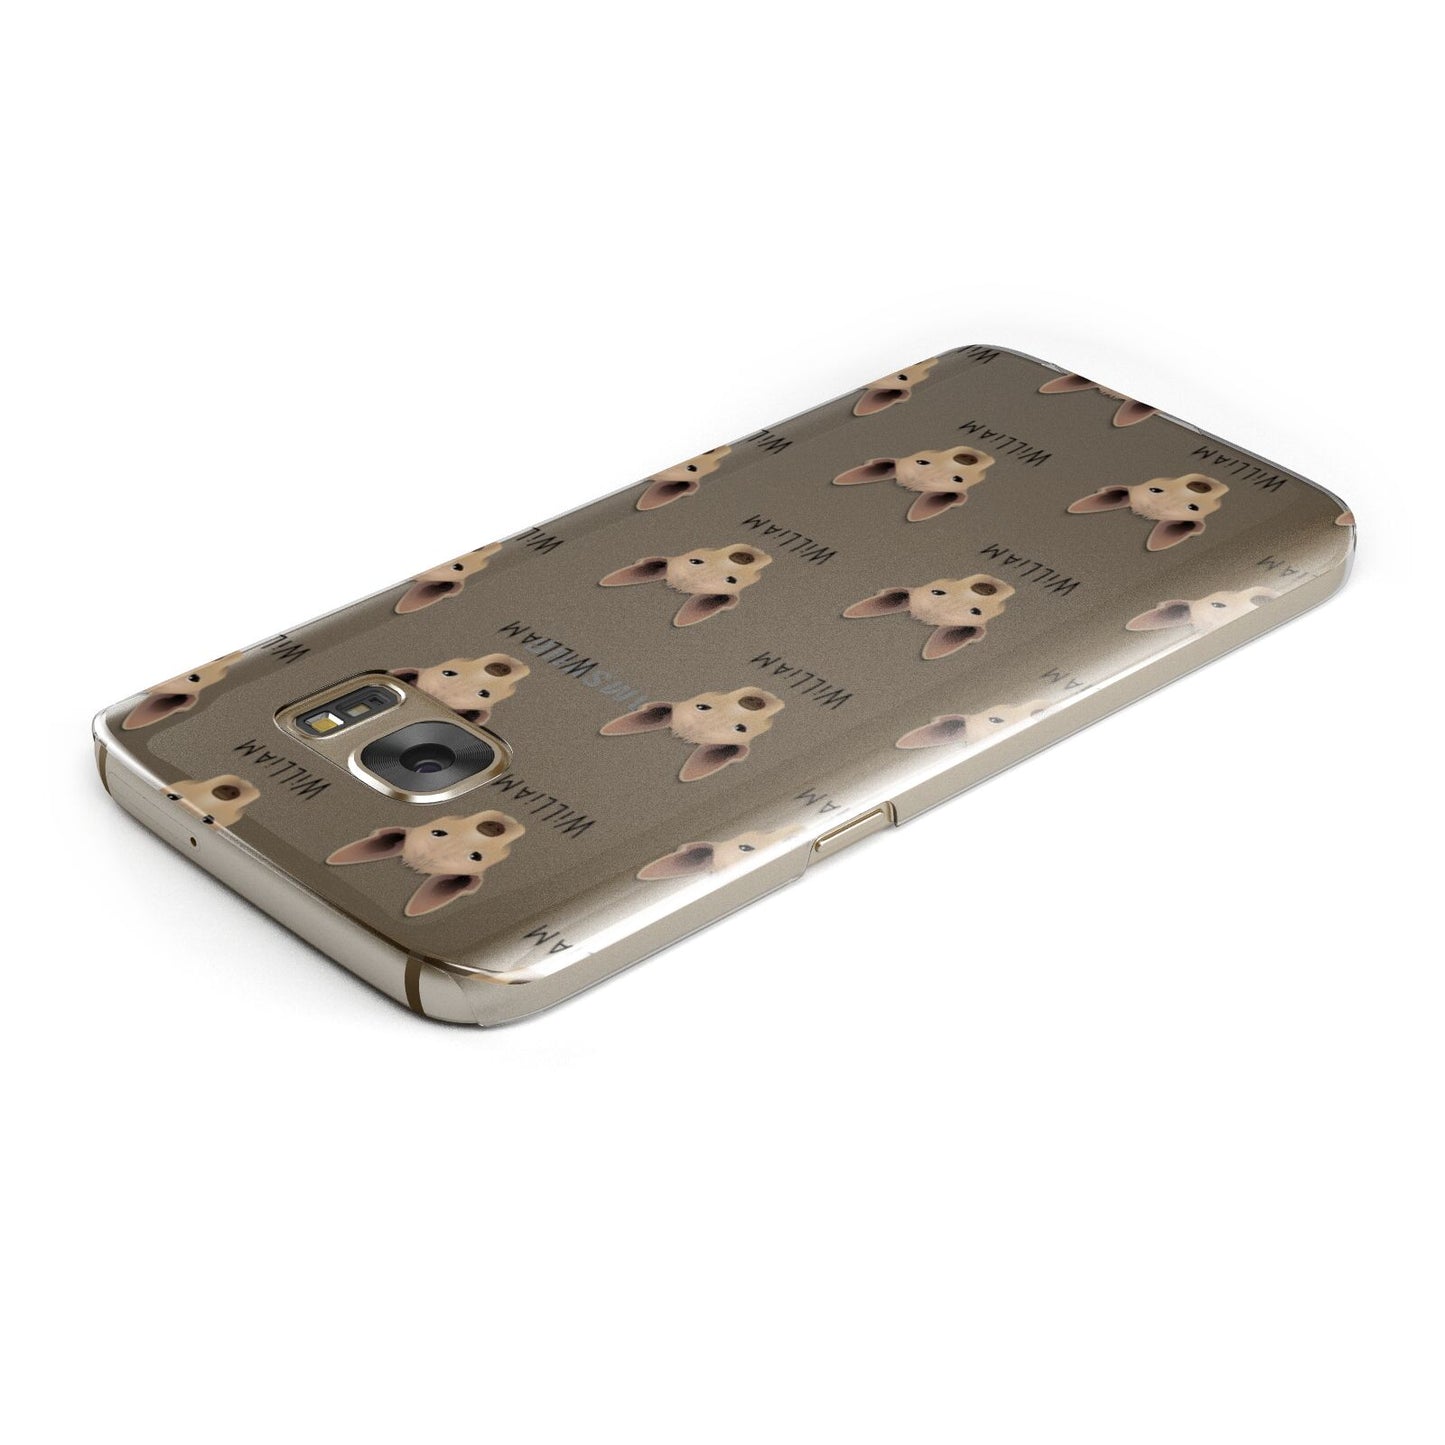 Mexican Hairless Icon with Name Samsung Galaxy Case Top Cutout